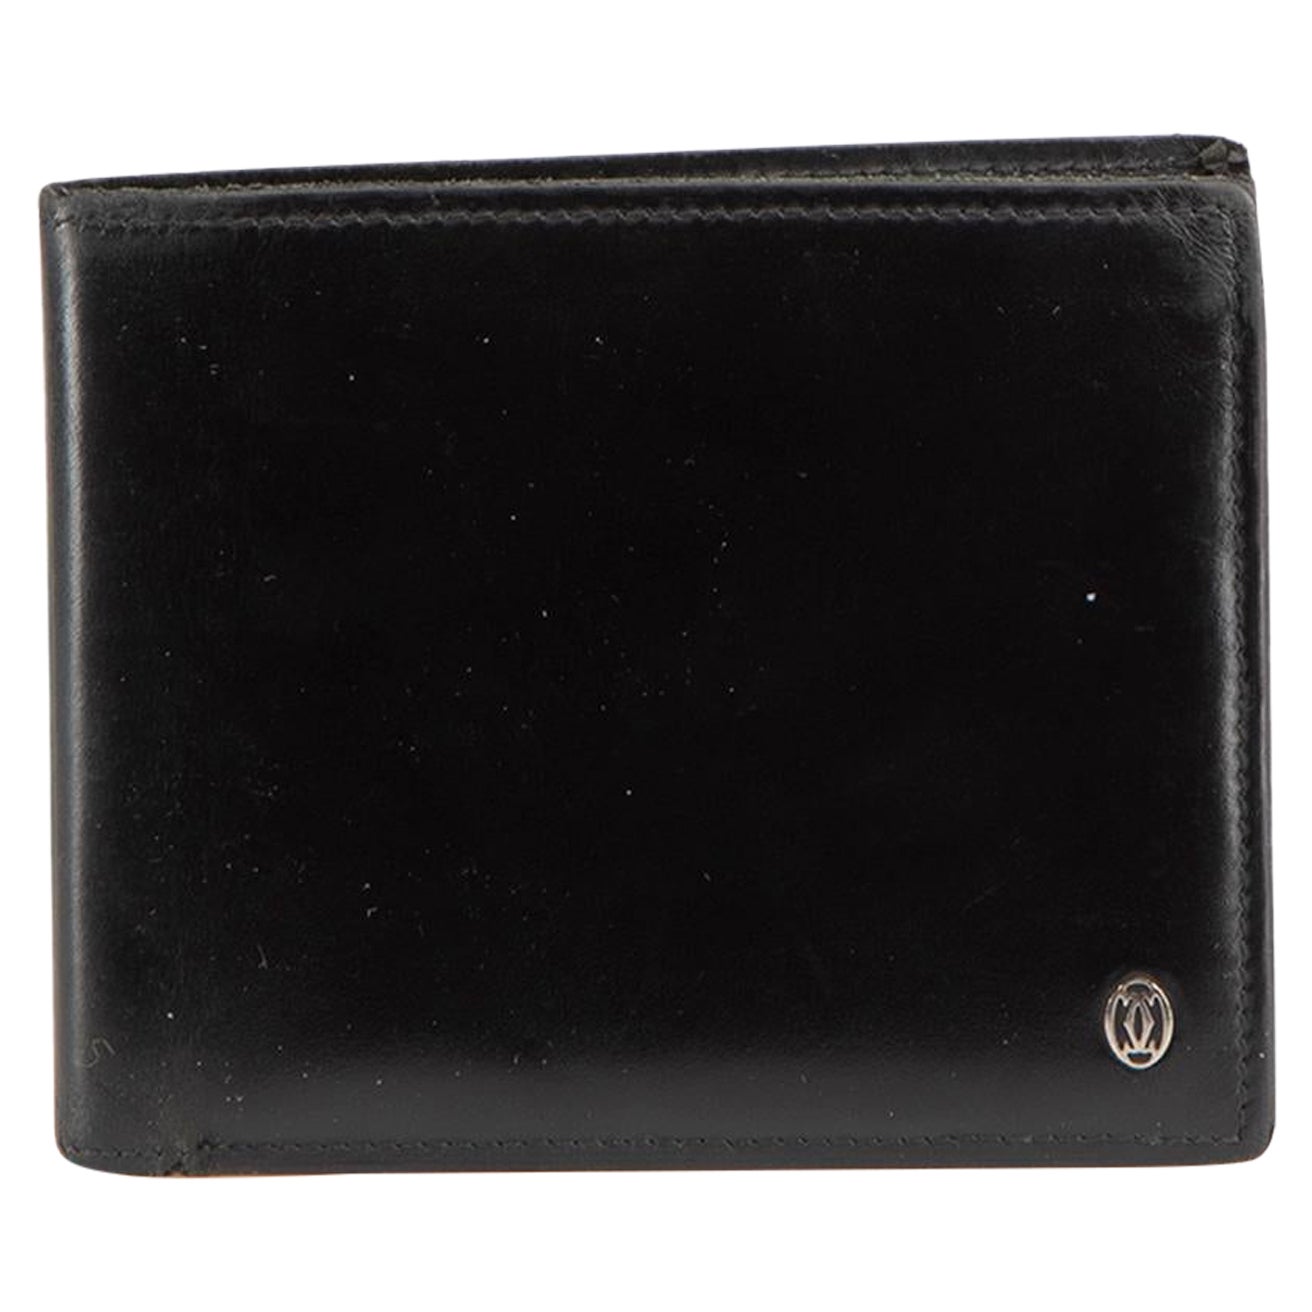 Cartier Black Leather Bifold Small Wallet